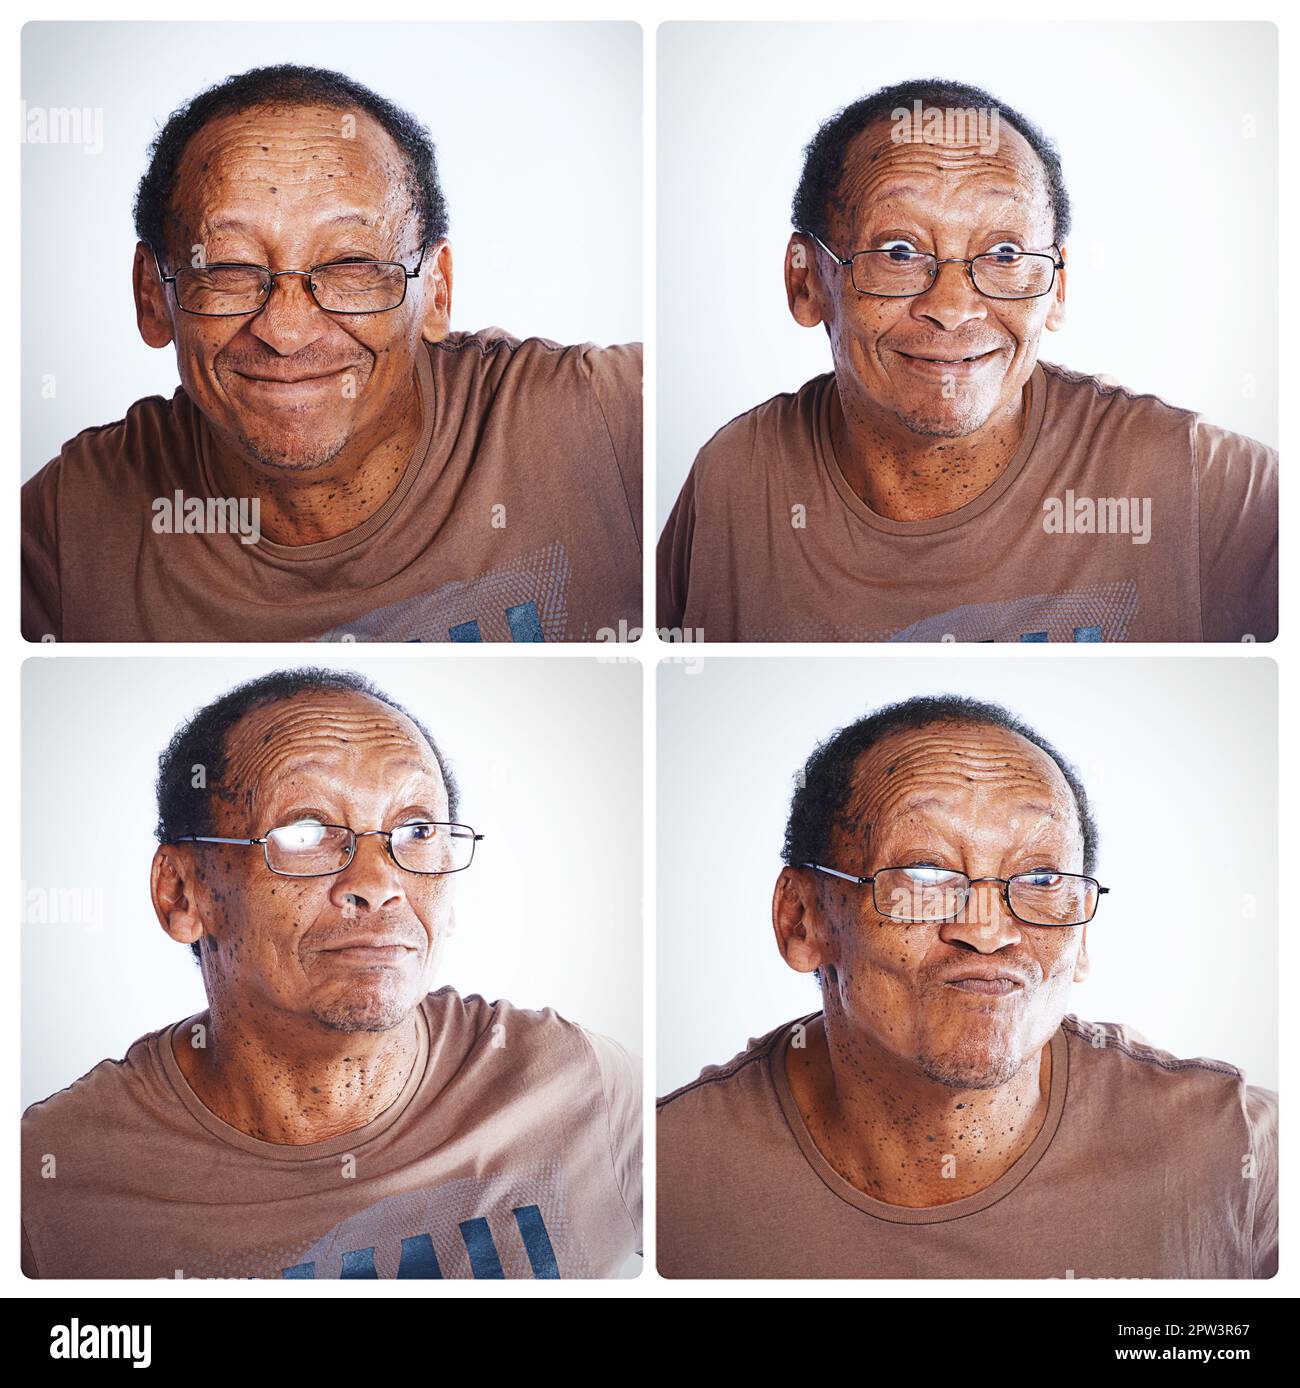 old people facial expressions